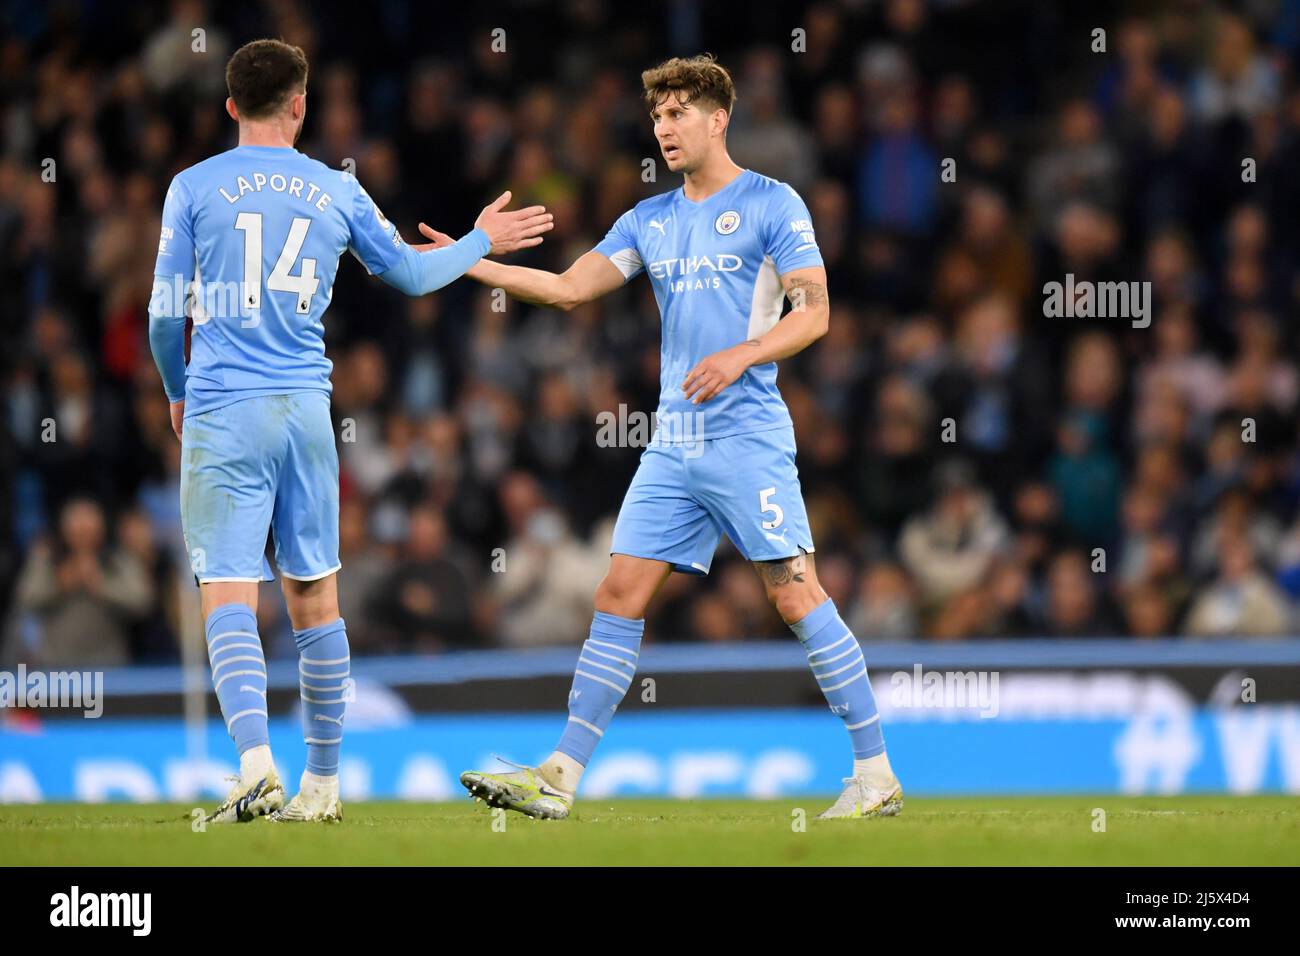 Manchester City's Aymeric Laporte and Manchester City's John Stones. Picture date: Thursday April 21, 2022. Photo credit should read:   Anthony Devlin/Alamy Live News/Alamy Live News Stock Photo